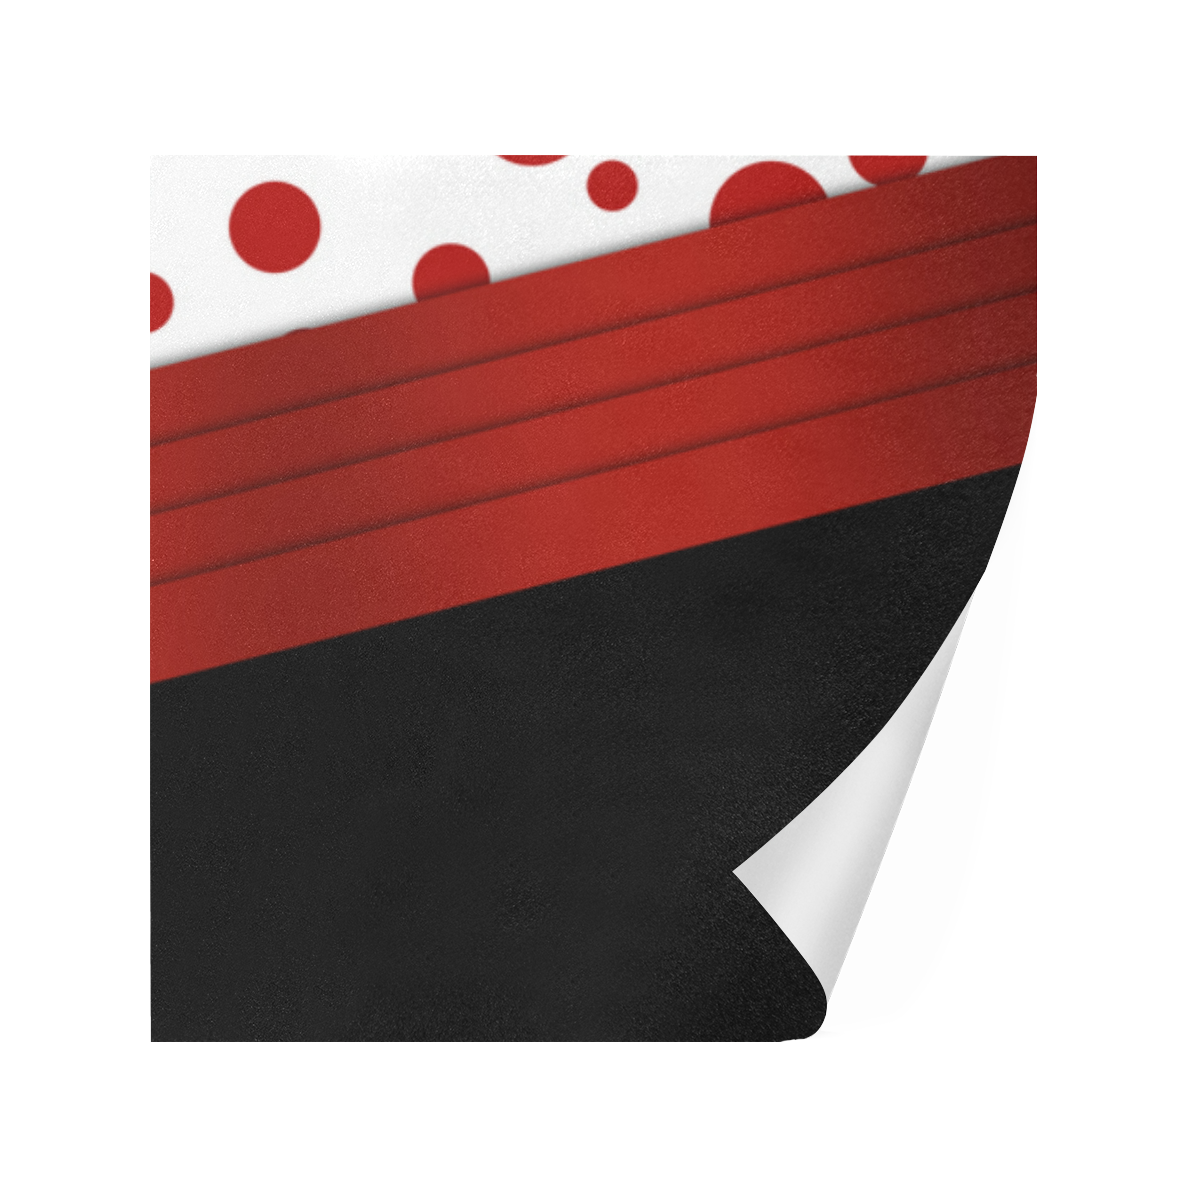 Polka Dots and Red Sash on Black Gift Wrapping Paper 58"x 23" (5 Rolls)